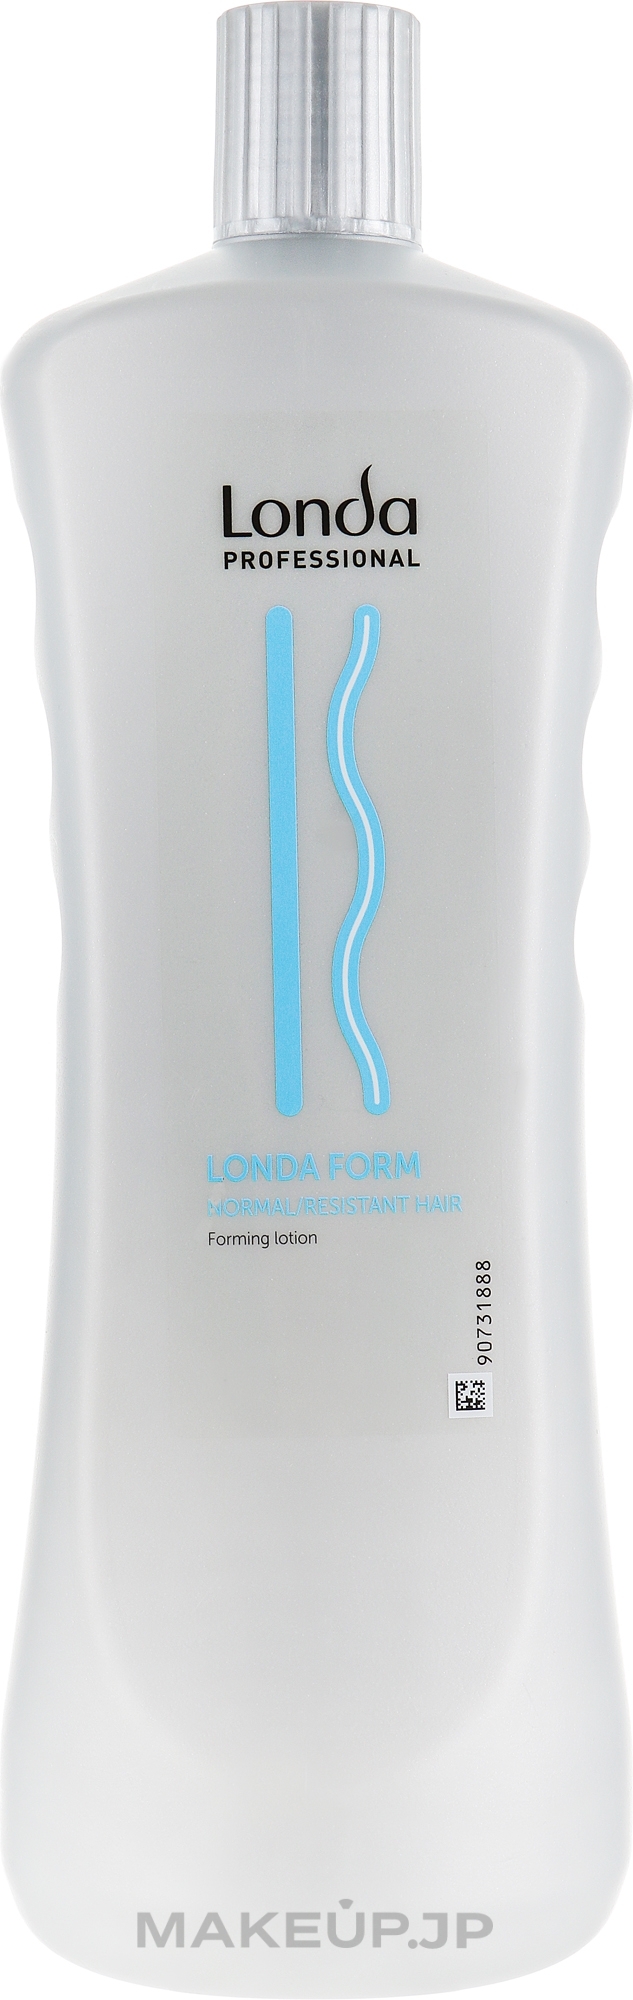 Long-Wear Forming Lotion for Normal & Resistant Hair - Londa Professional Londa Form Normal/Resistant Hair Forming Lotion — photo 1000 ml